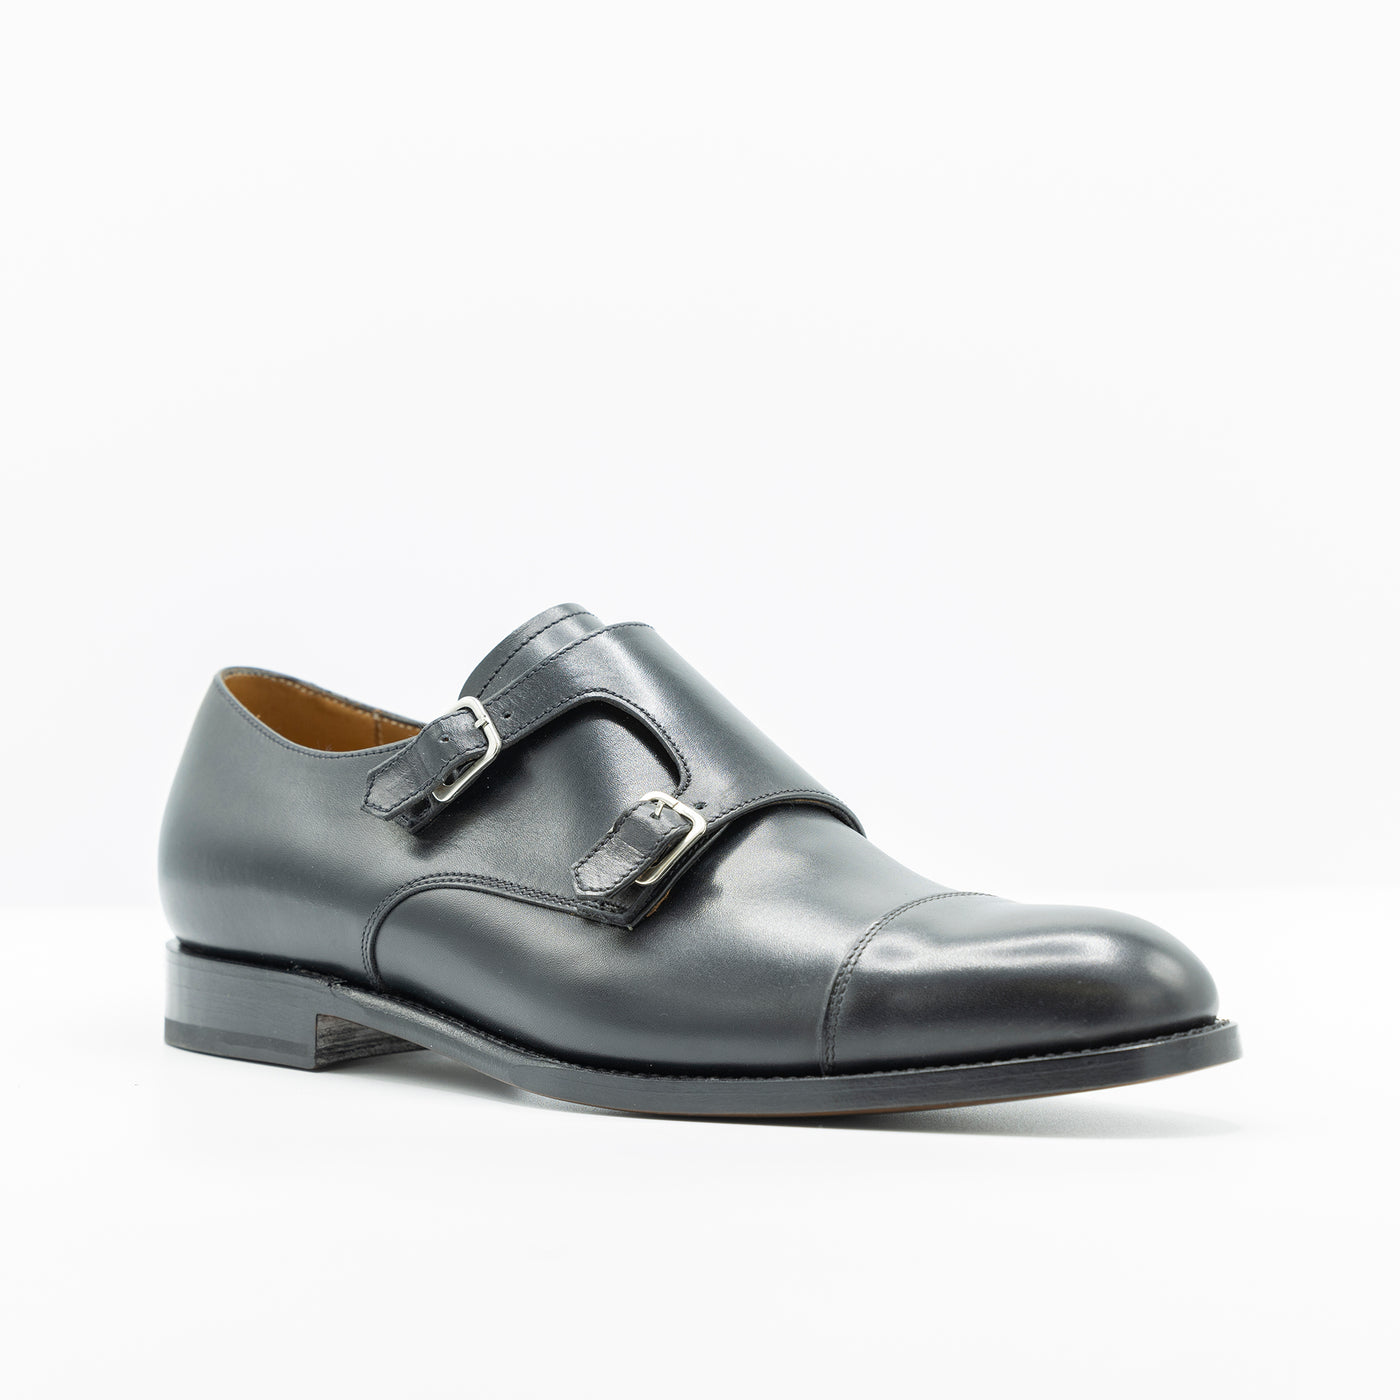 Black leather double monk strap. good year welt leather soles cap toe.